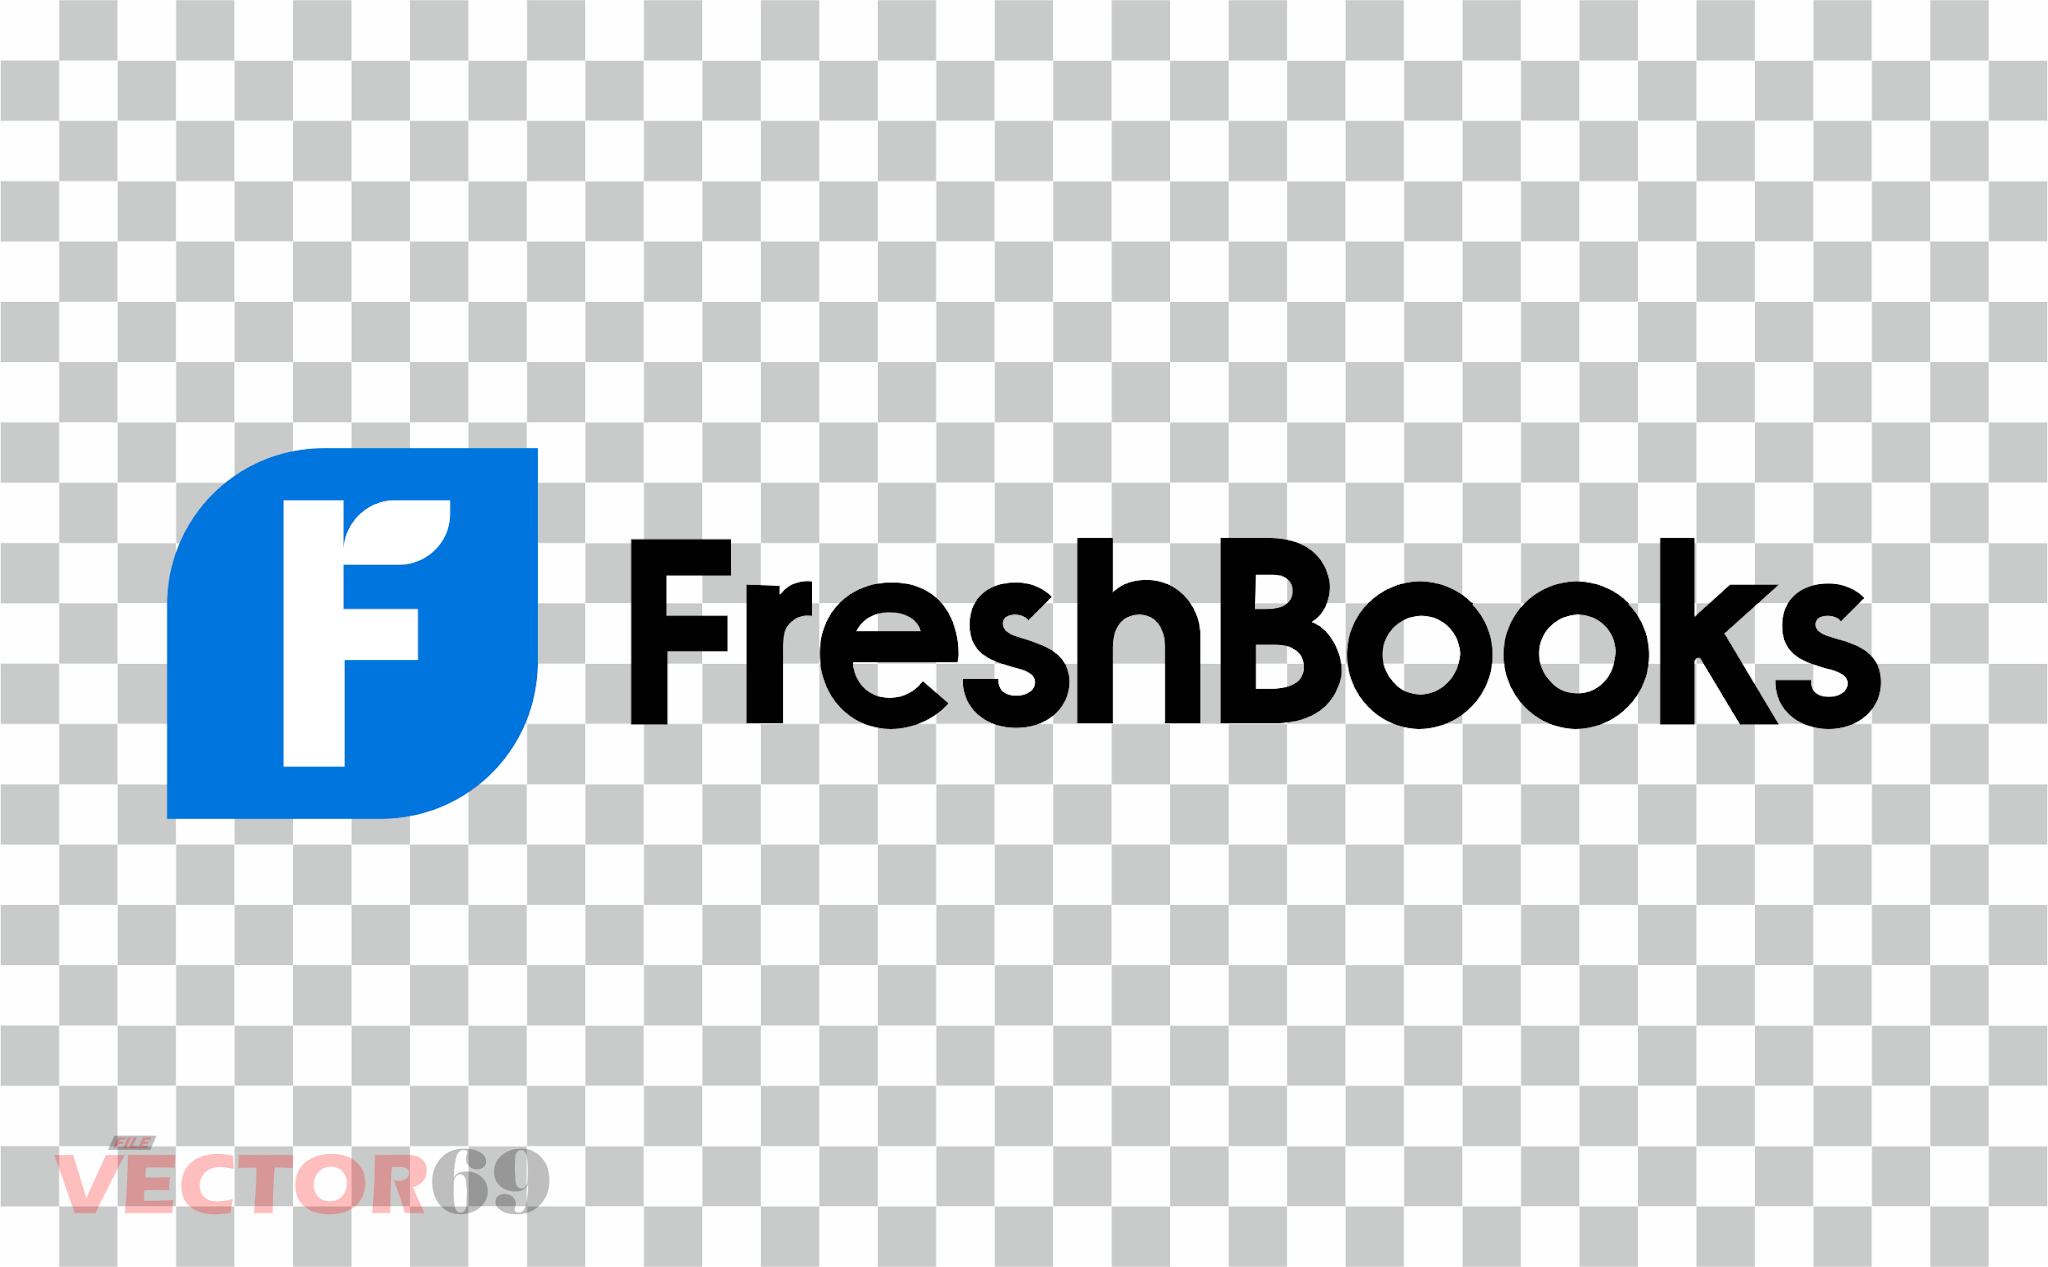 FreshBooks Logo - Download Vector File PNG (Portable Network Graphics)